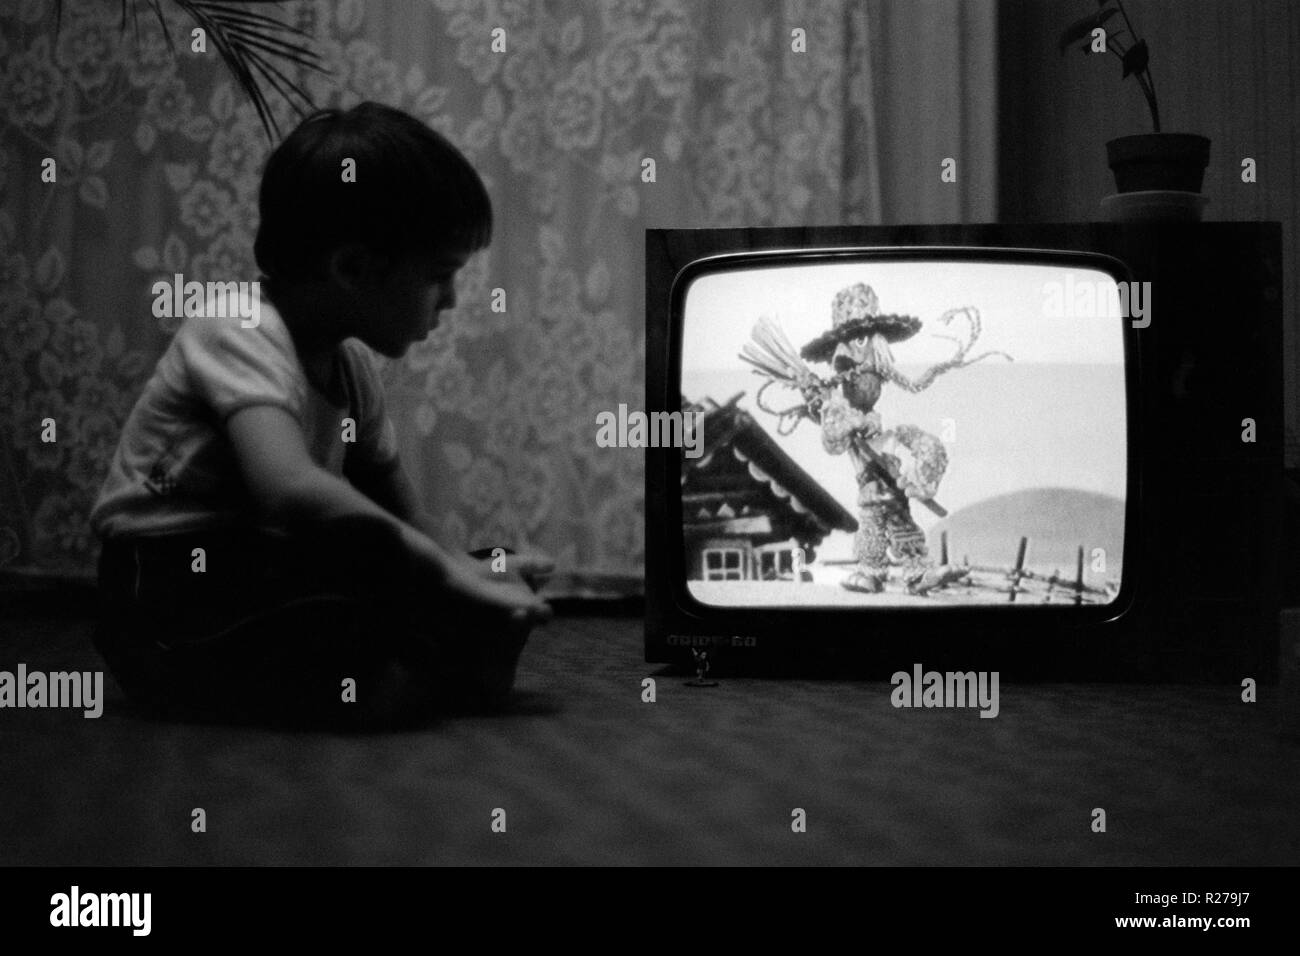 young boy sitting on floor watching cartoons on a vintage television set 1970s hungary Stock Photo